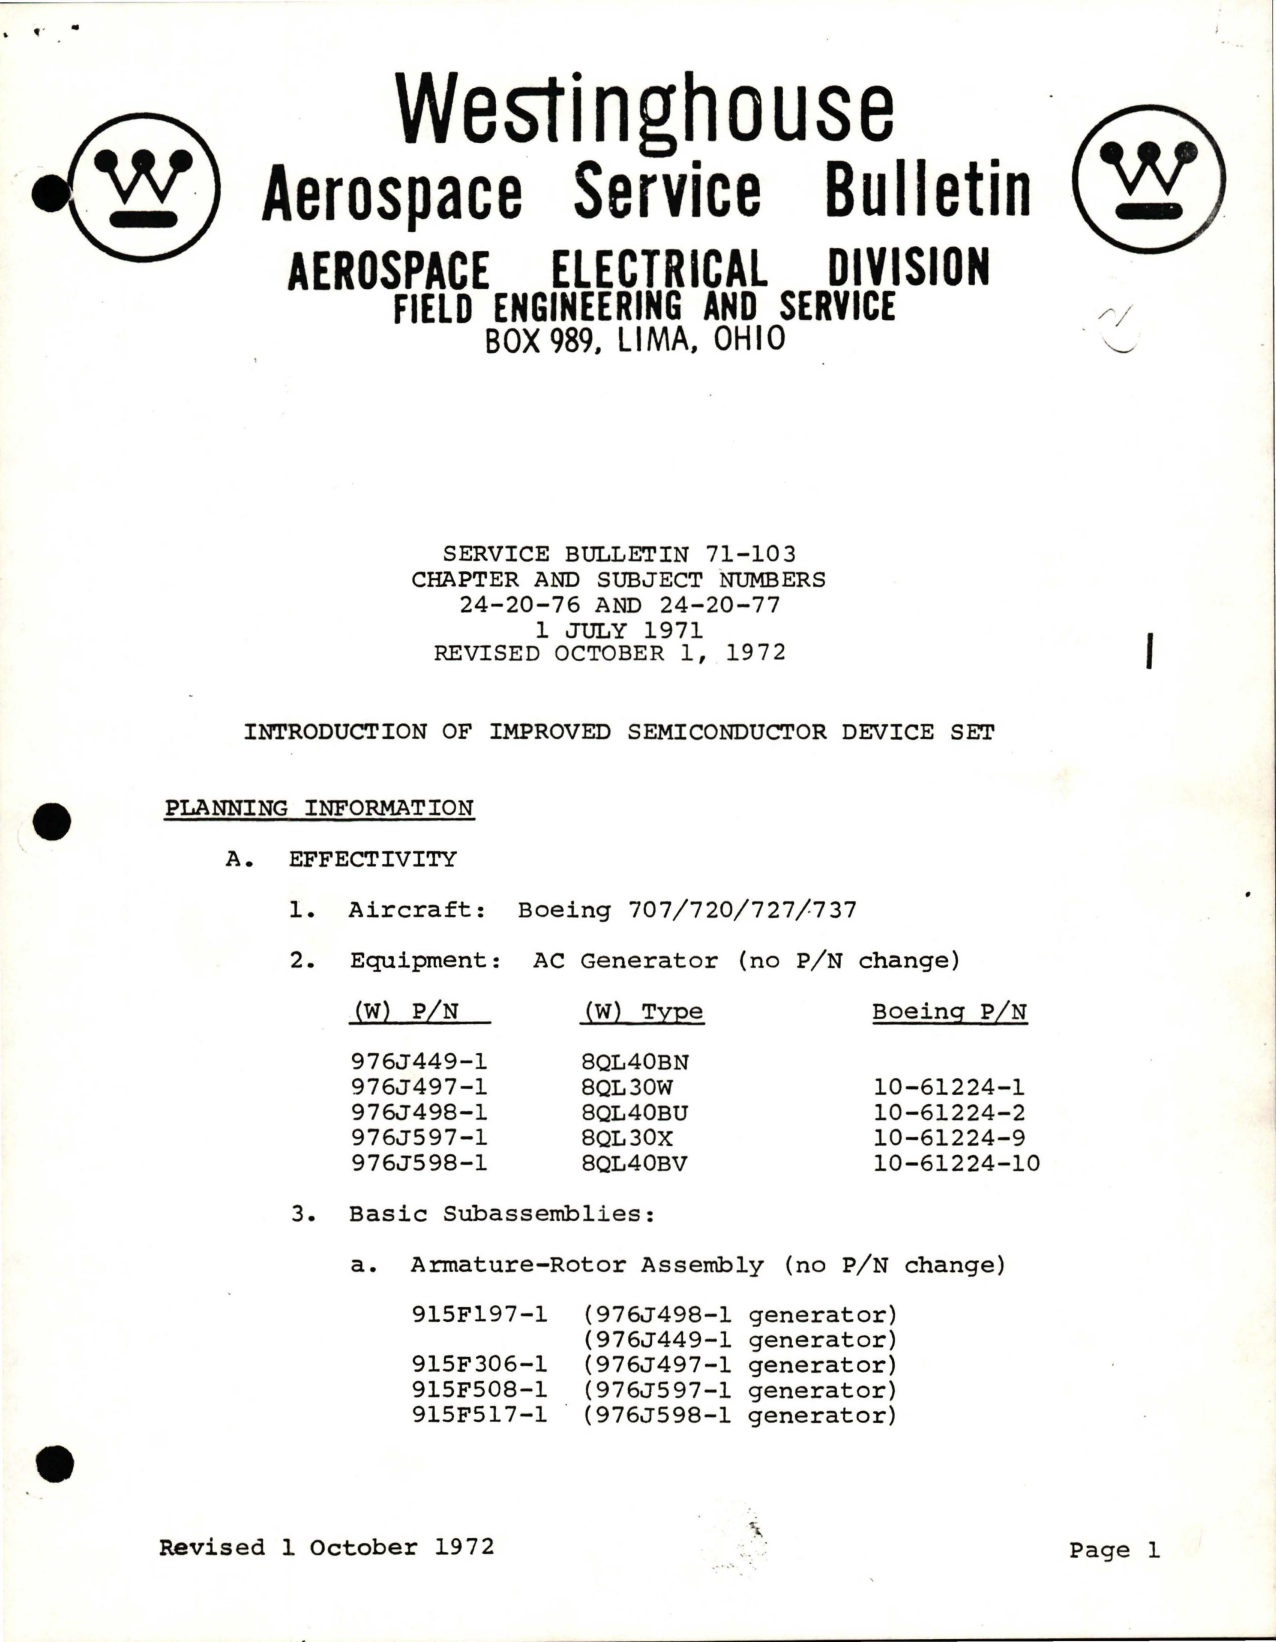 Sample page 1 from AirCorps Library document: Introduction of Improved Semiconductor Device Set 